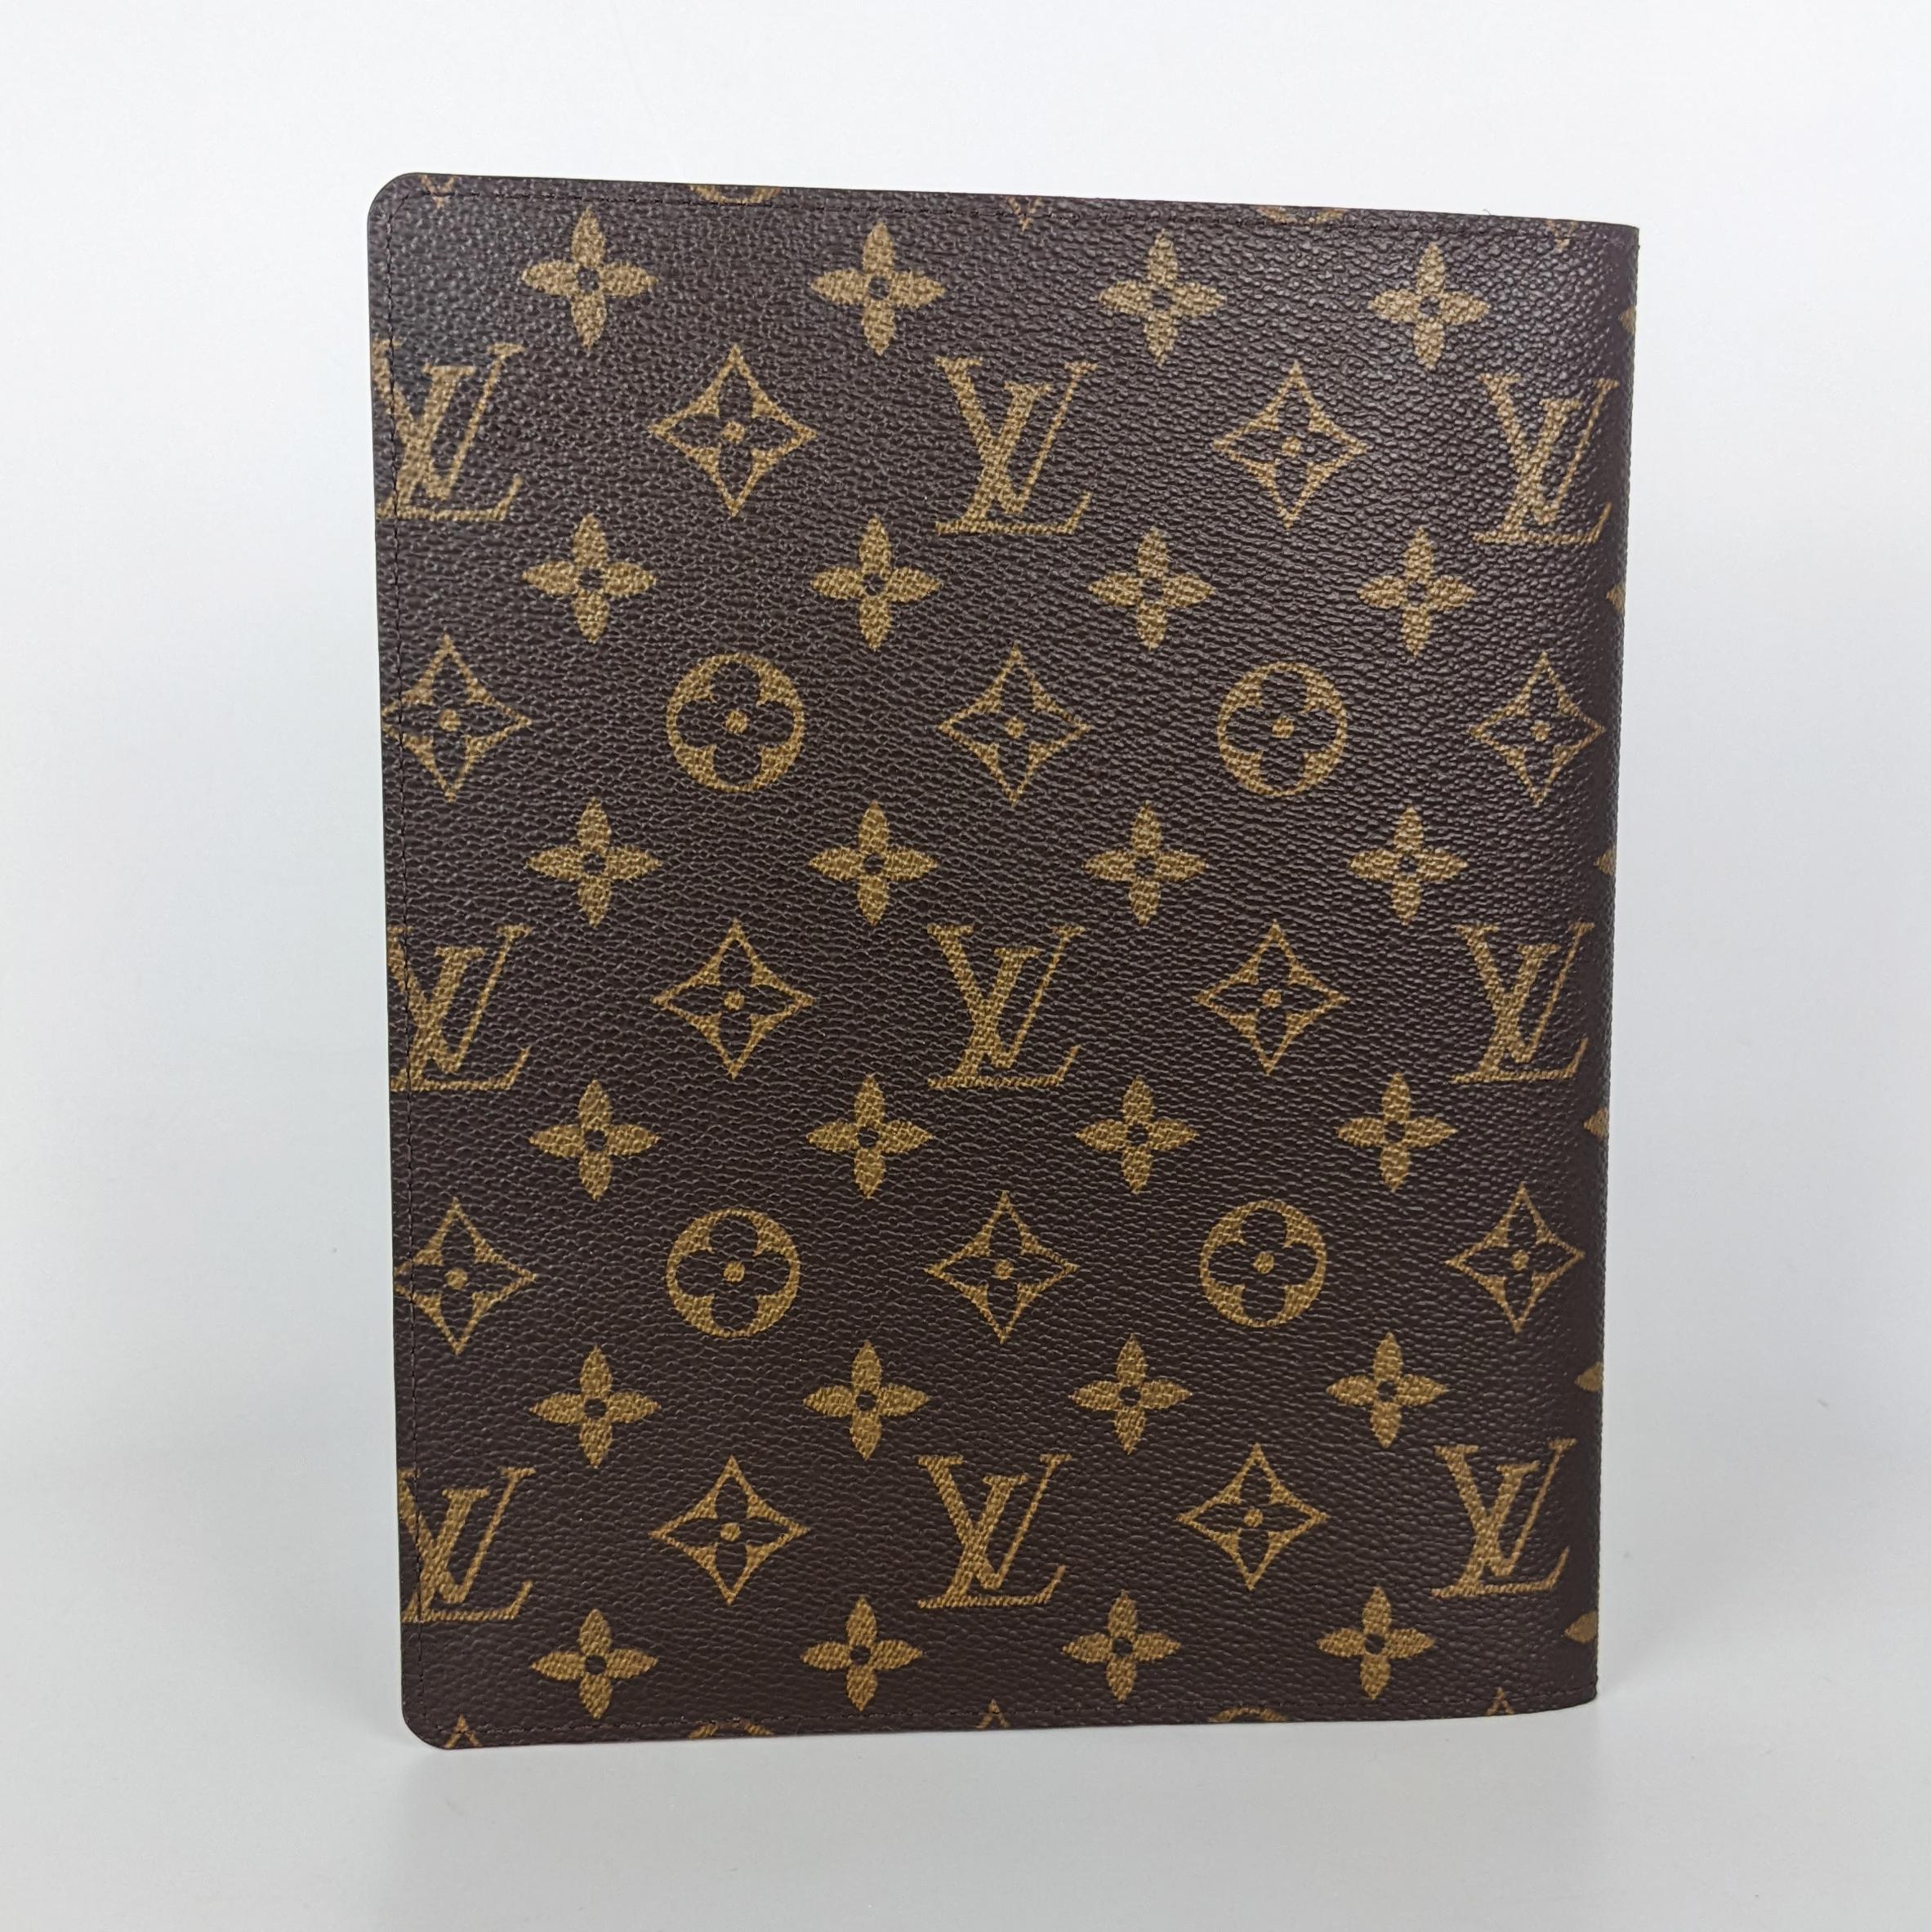 Condition: This authentic Louis Vuitton agenda has no visible signs of wear.

No accessories included (dust bag, box, etc.)

Features: This cover opens to a terra cotta cross-grain leather interior with patched pockets and card slots.

Material: